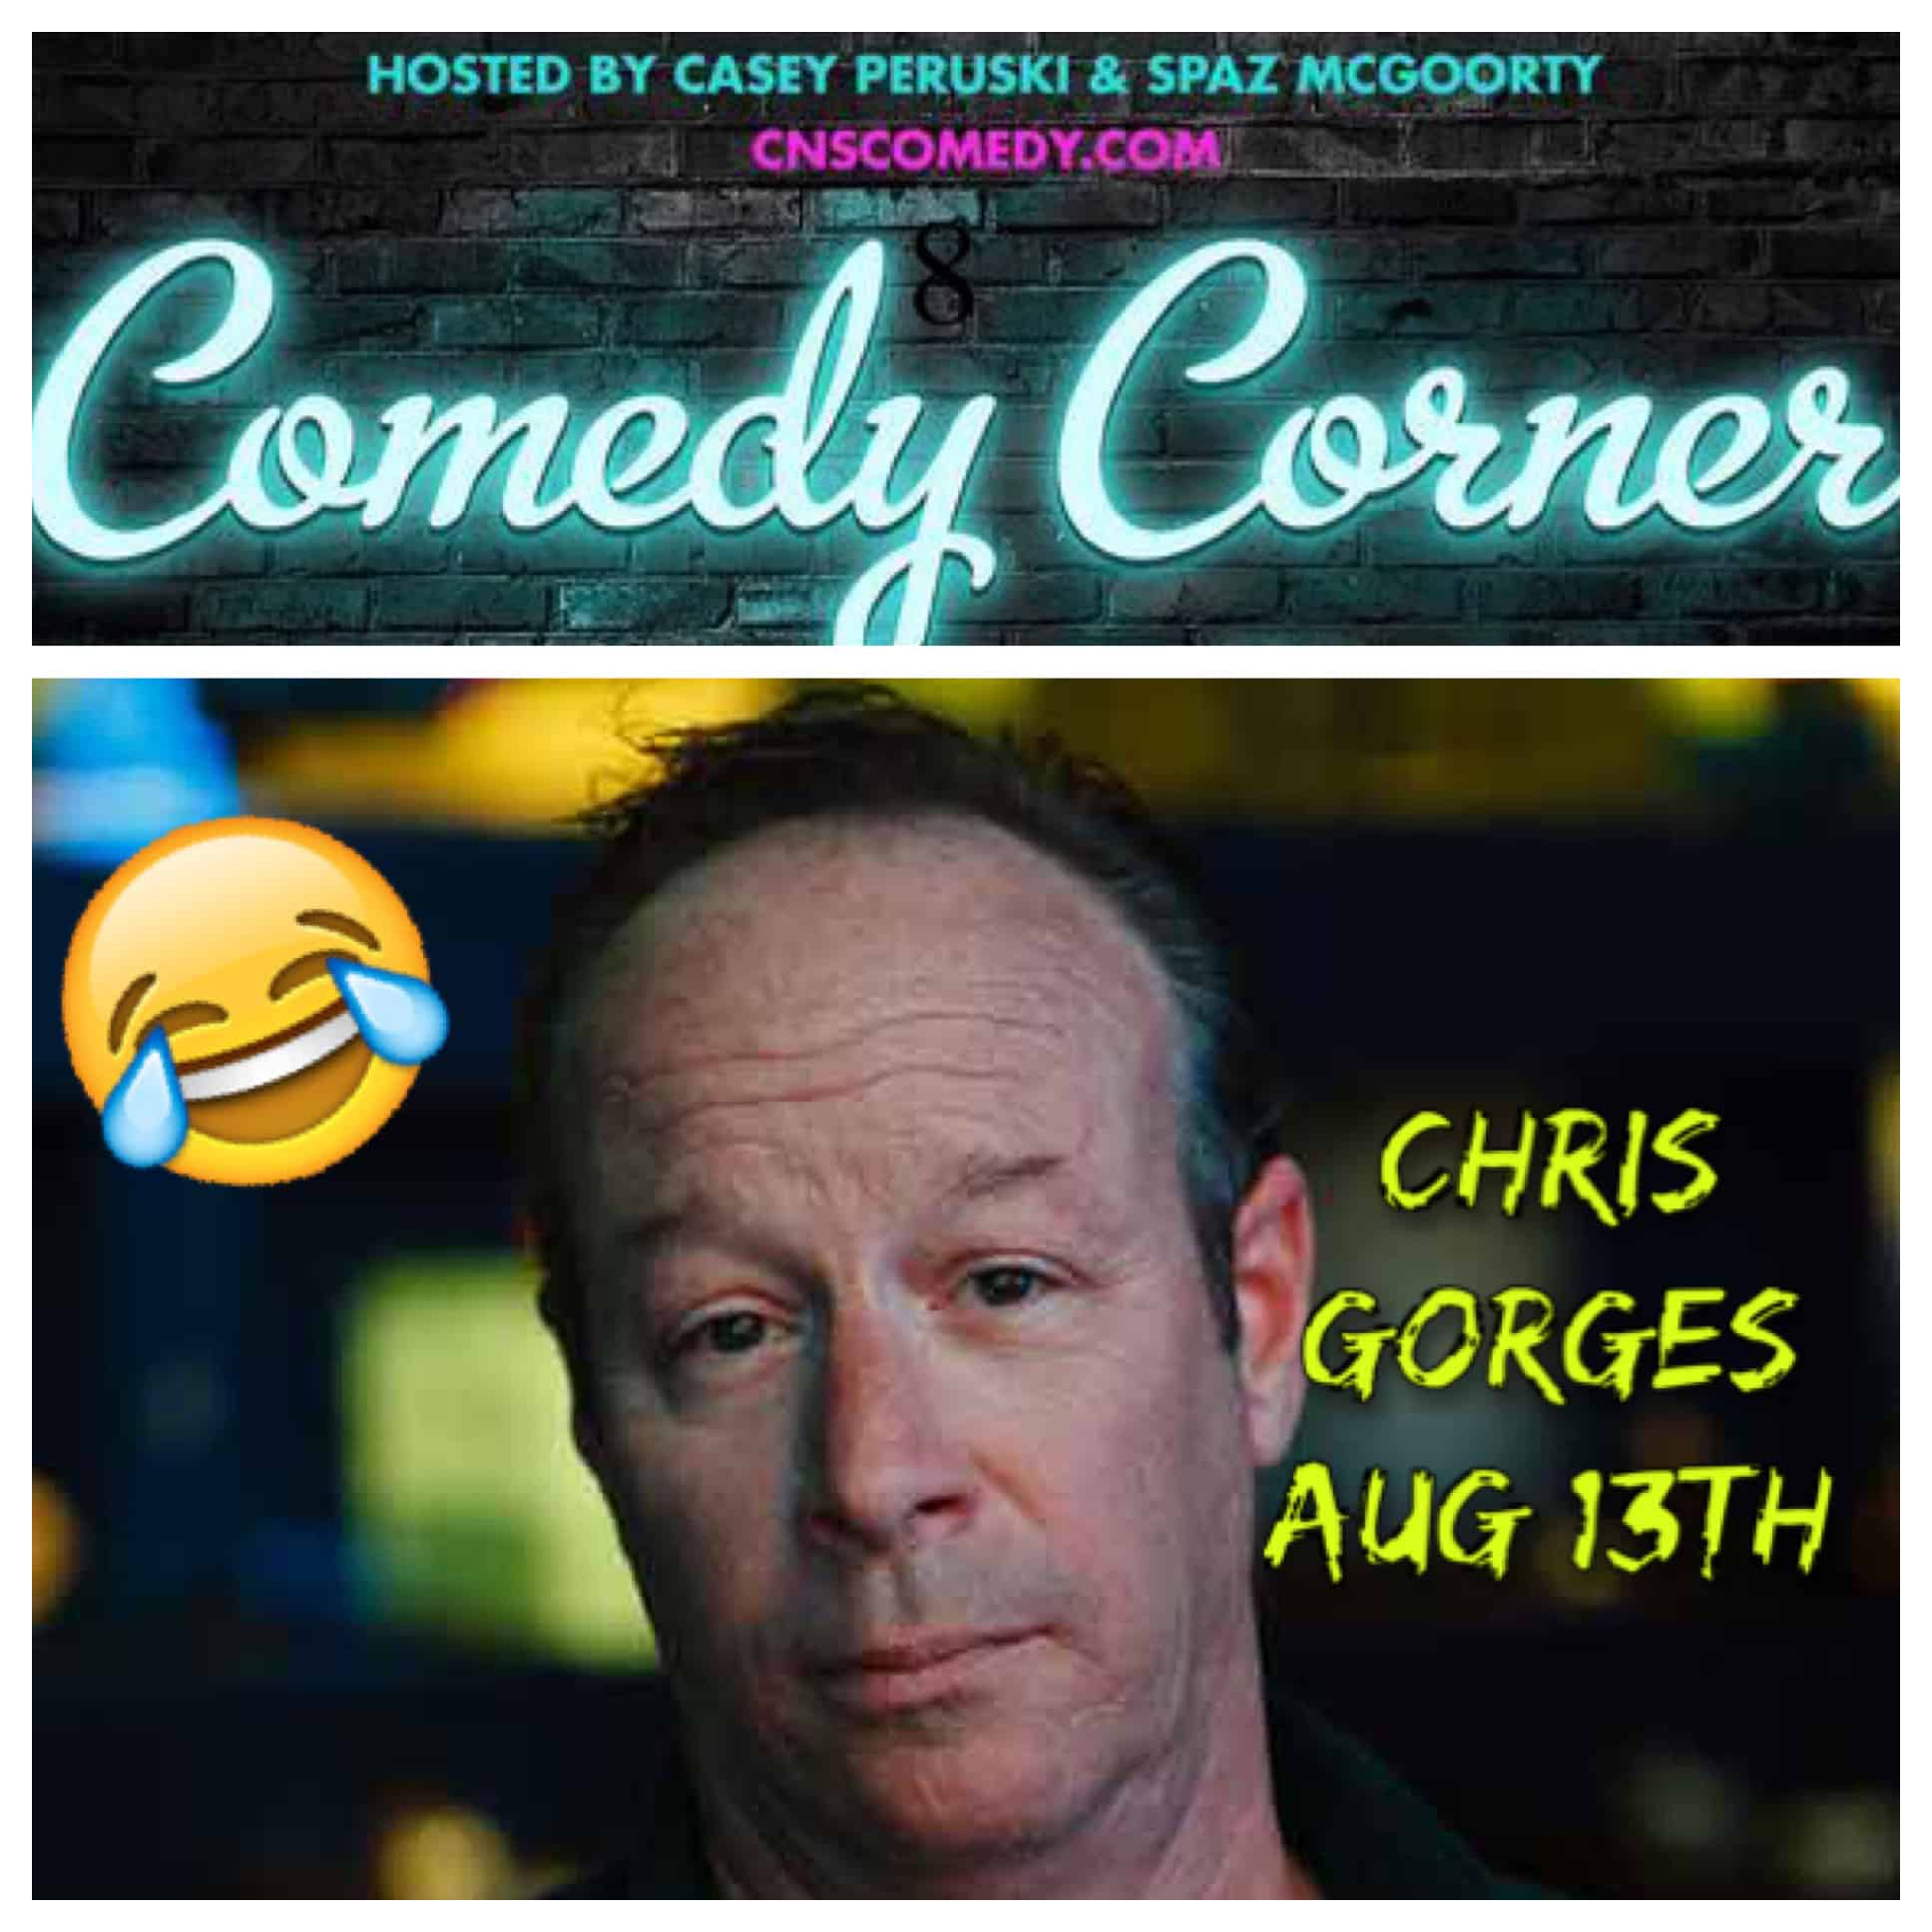 Comedy Corner Presents: Chris Gorges LIVE at The Black Box